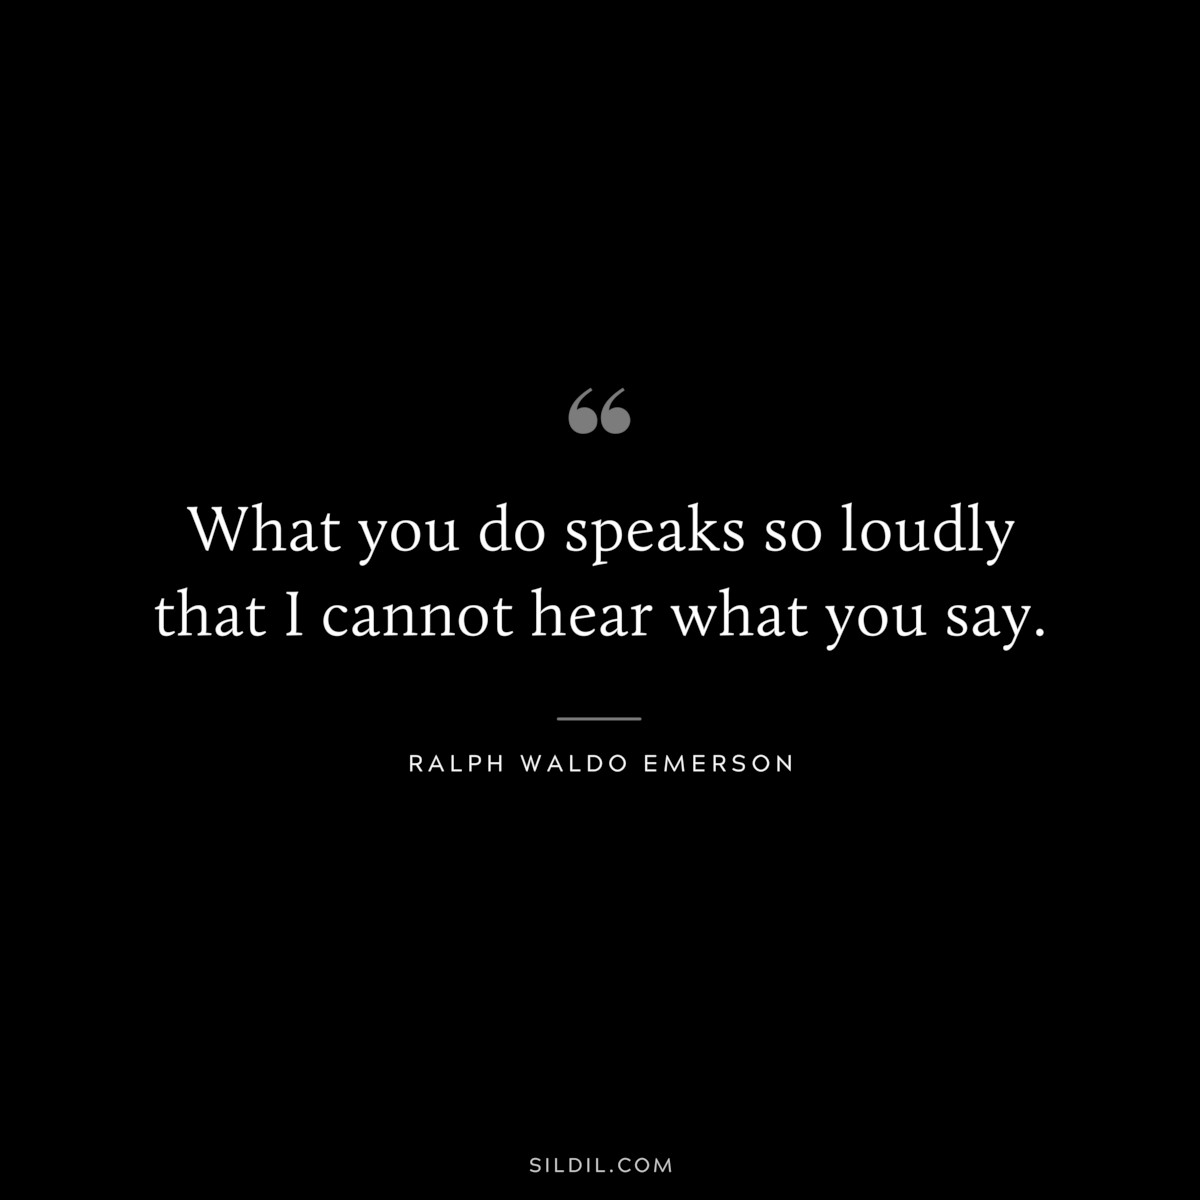 What you do speaks so loudly that I cannot hear what you say. — Ralph Waldo Emerson